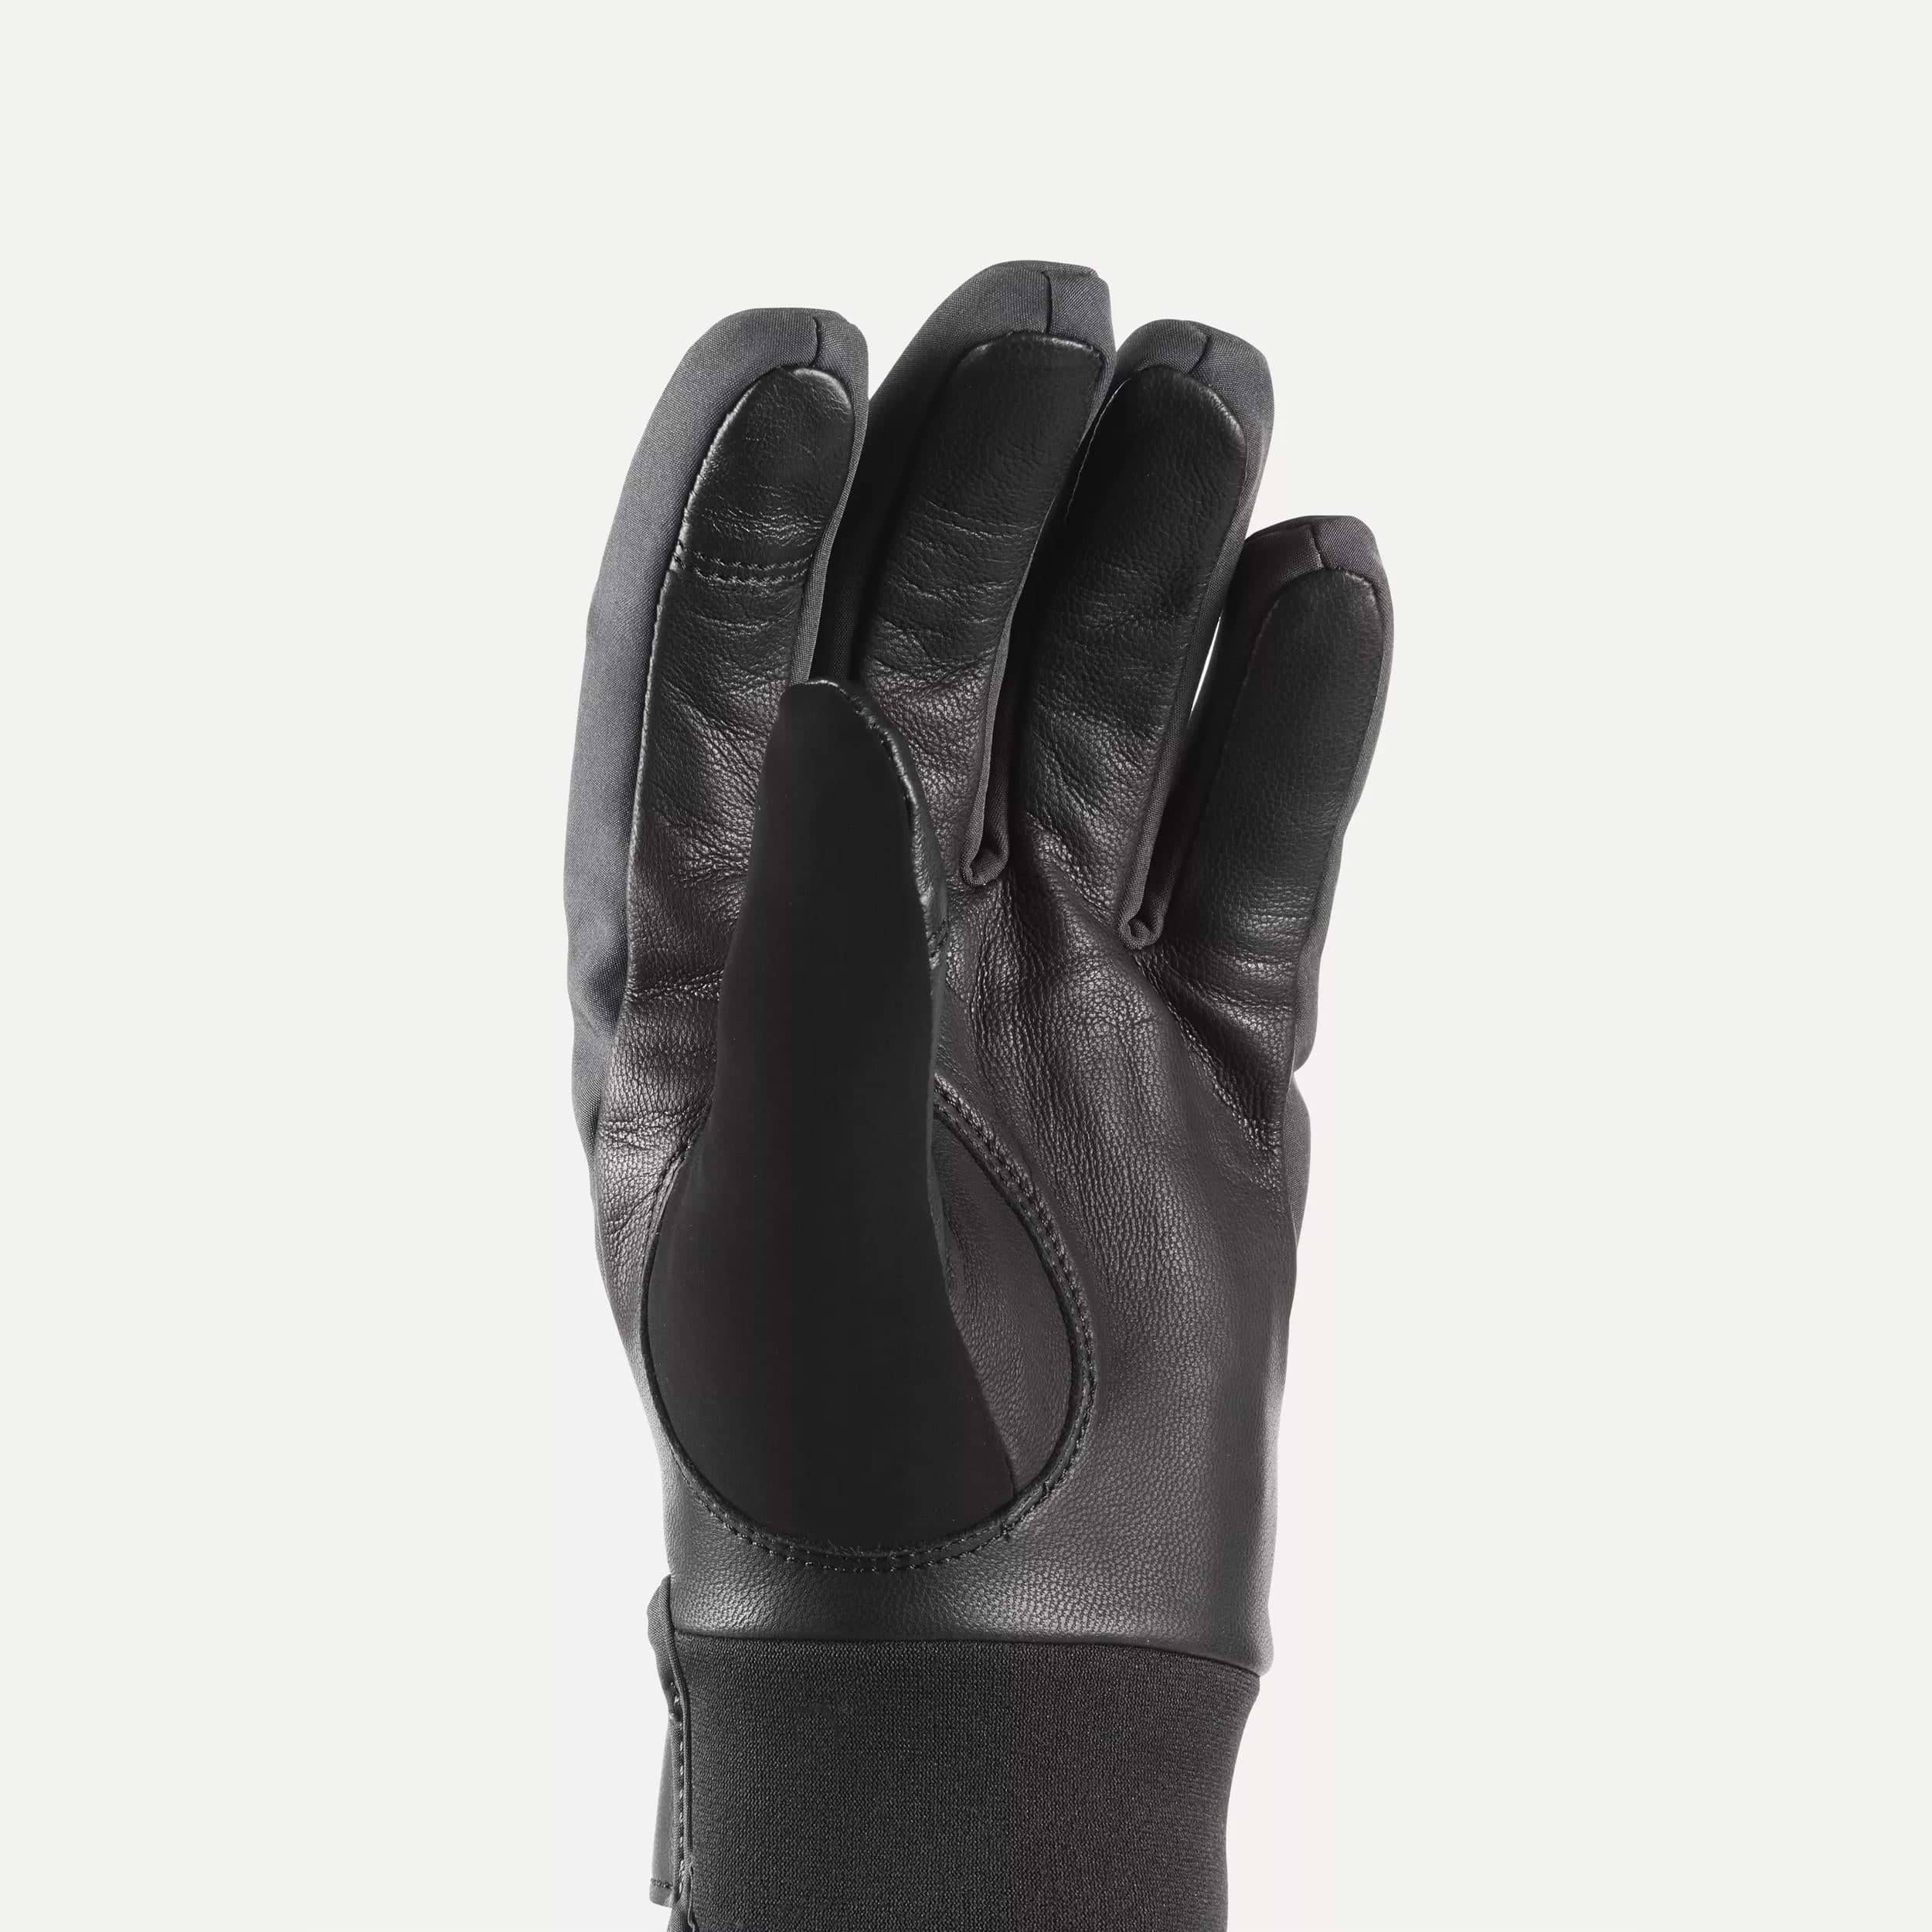 Discover a wide range of biker clothing, gloves, and protectors to